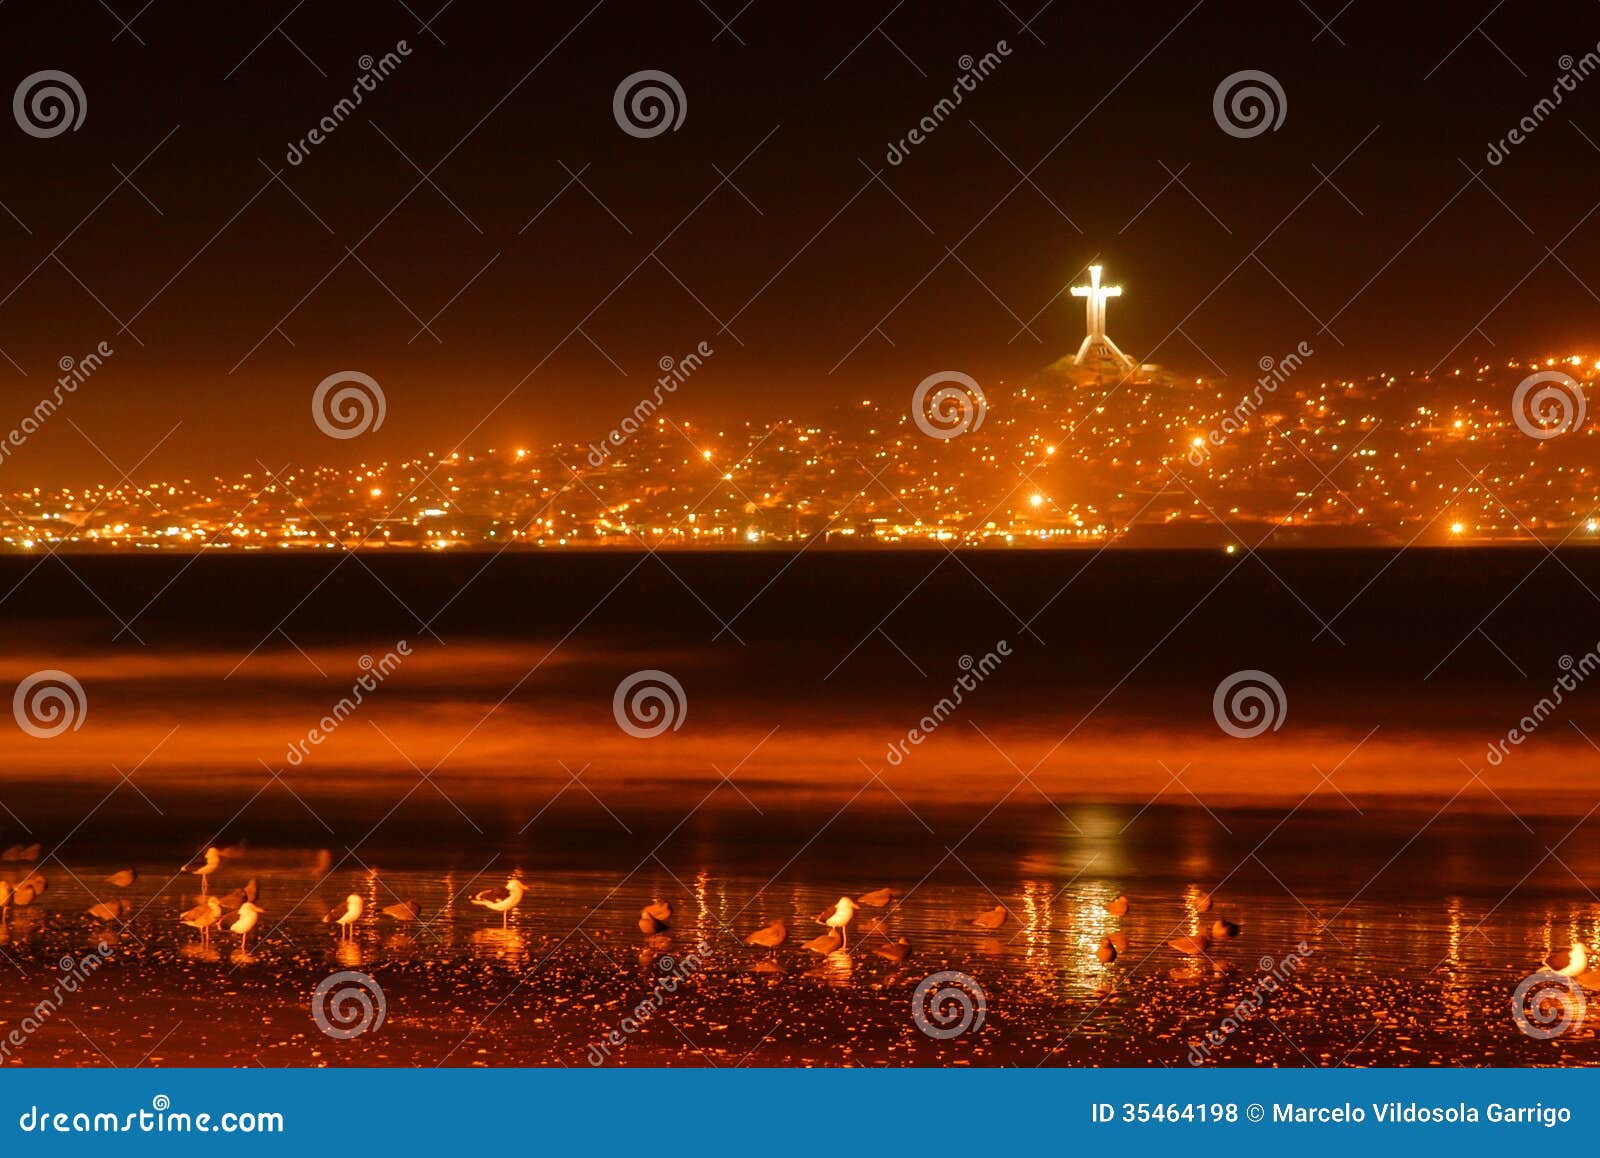 bay of coquimbo, chile by night